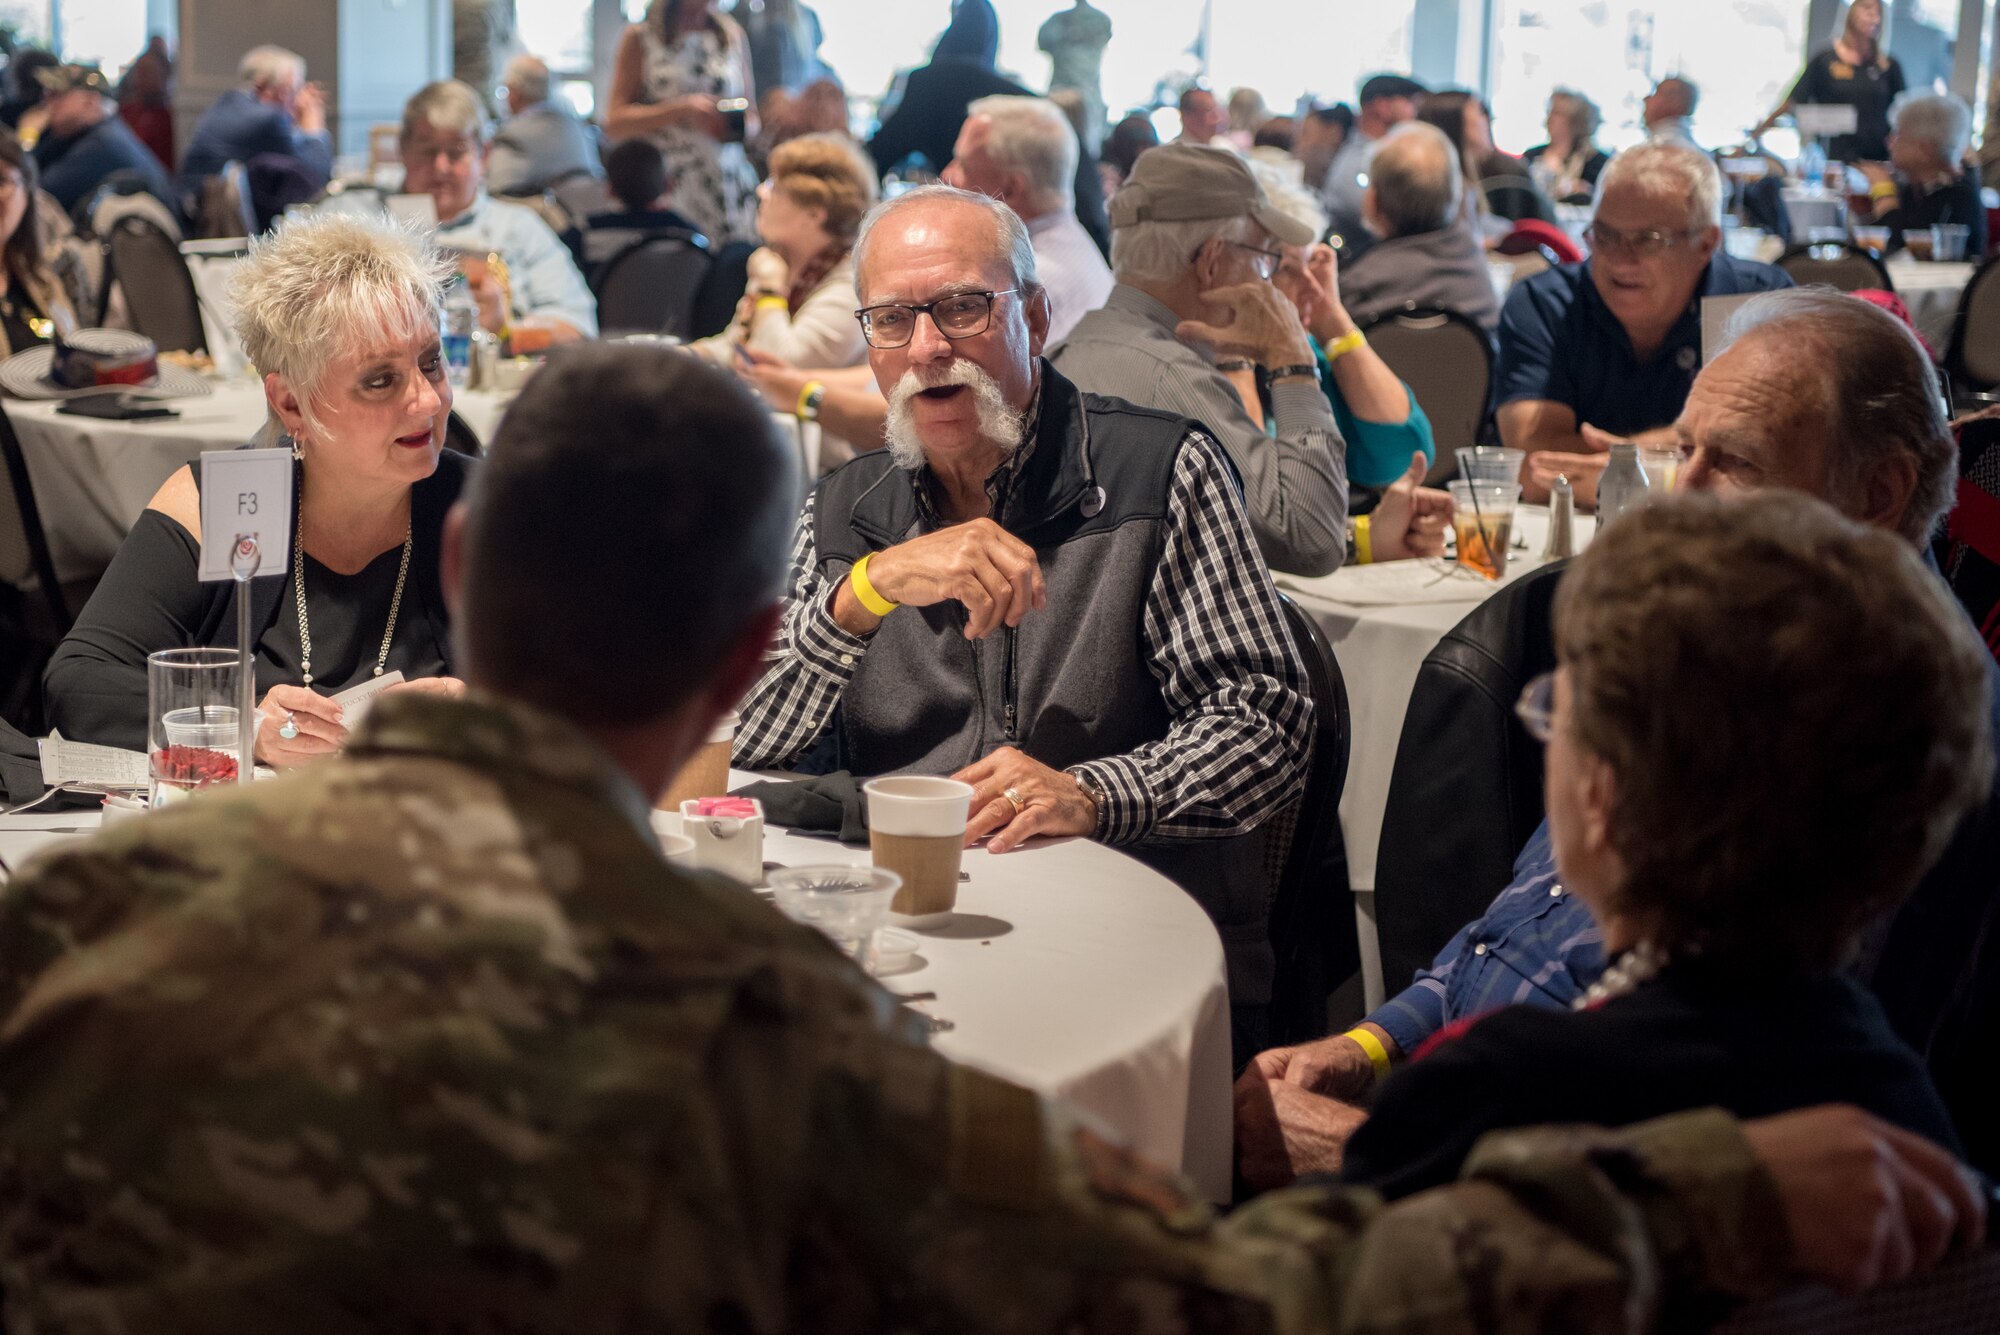 Air Force Gen. Joseph Lengyel, chief of the National Guard Bureau, speaks with Gold Star family members at the tenth annual Survivors Day at the Races at Churchill Downs in Louisville, Ky., Nov. 3, 2019. The event welcomed nearly 1,000 family members of fallen service members for a day of fellowship and healing. (U.S. Air National Guard photo by Staff Sgt. Joshua Horton)